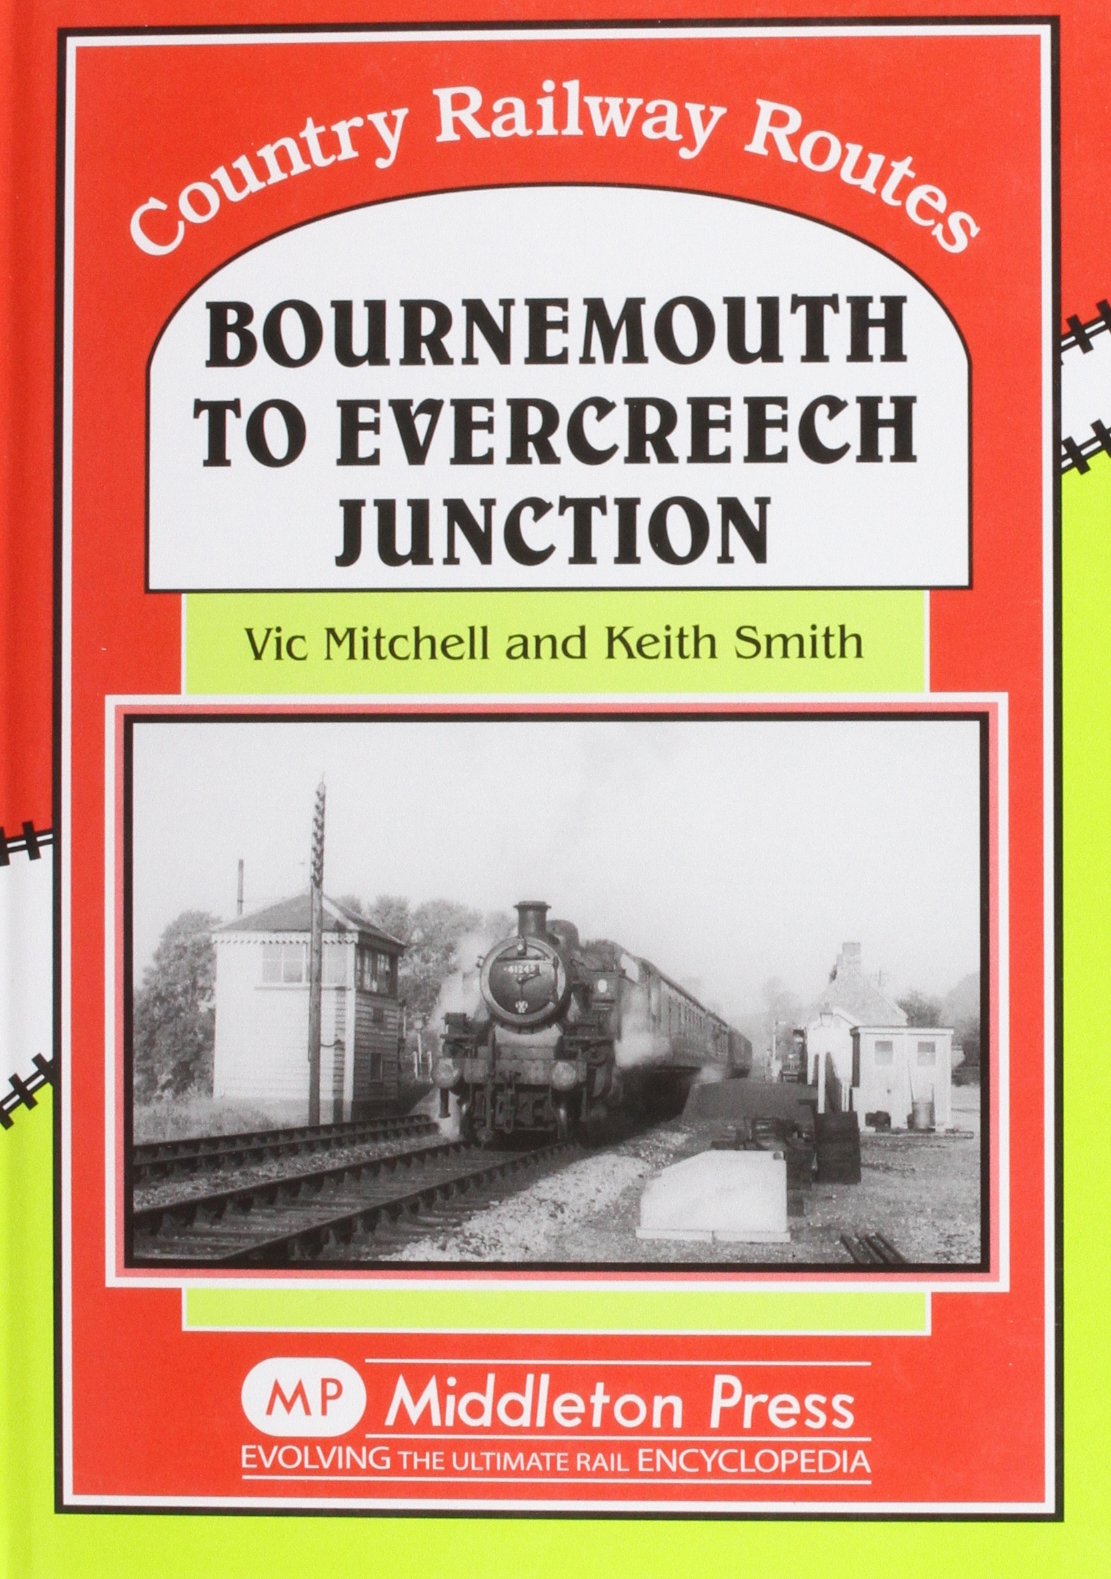 Country Railway Routes Bournemouth to Evercreech Junction